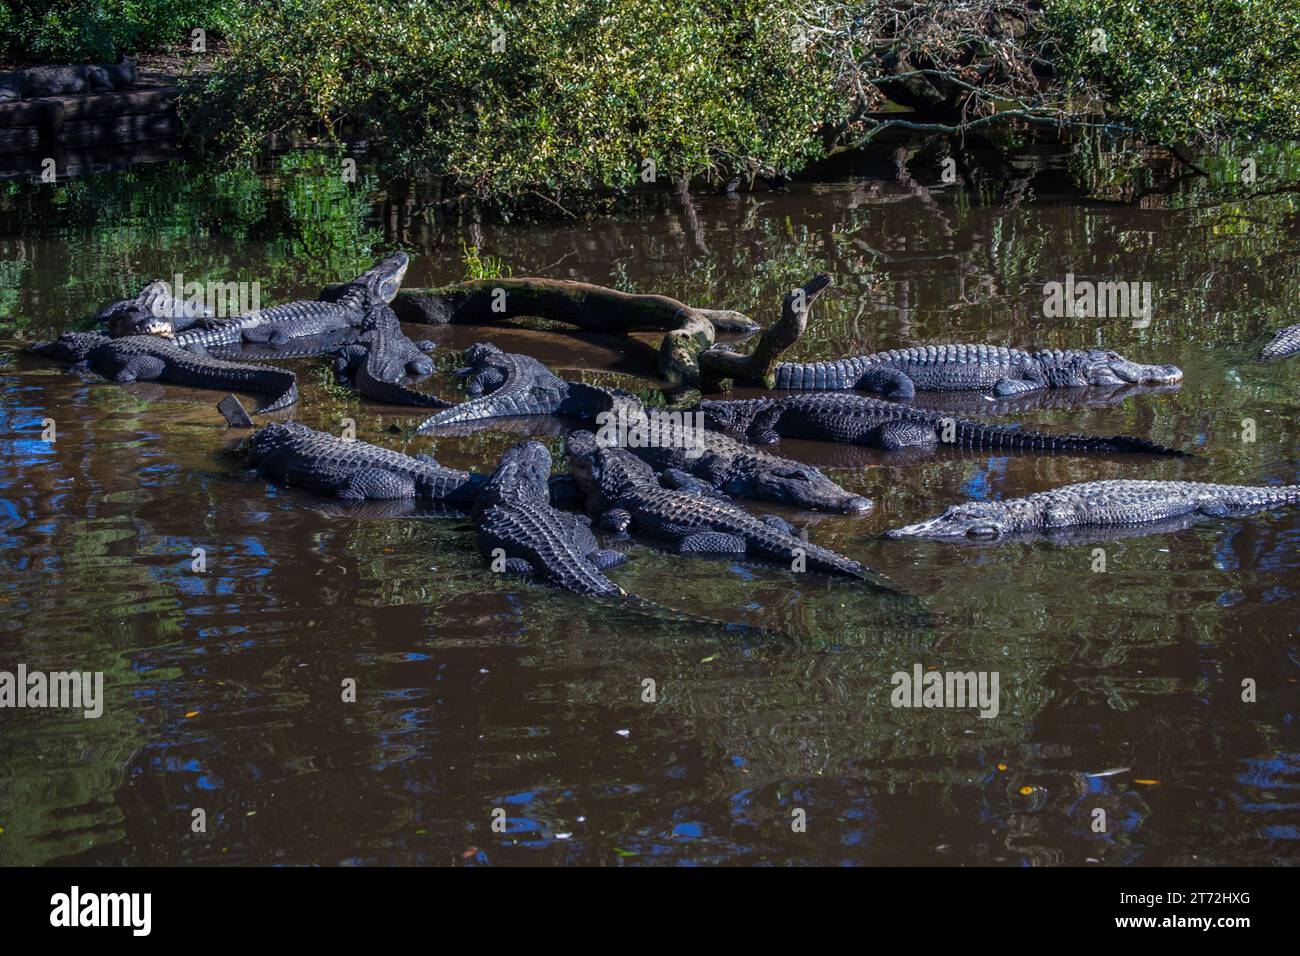 Alligators in a group in the swamp Stock Photo